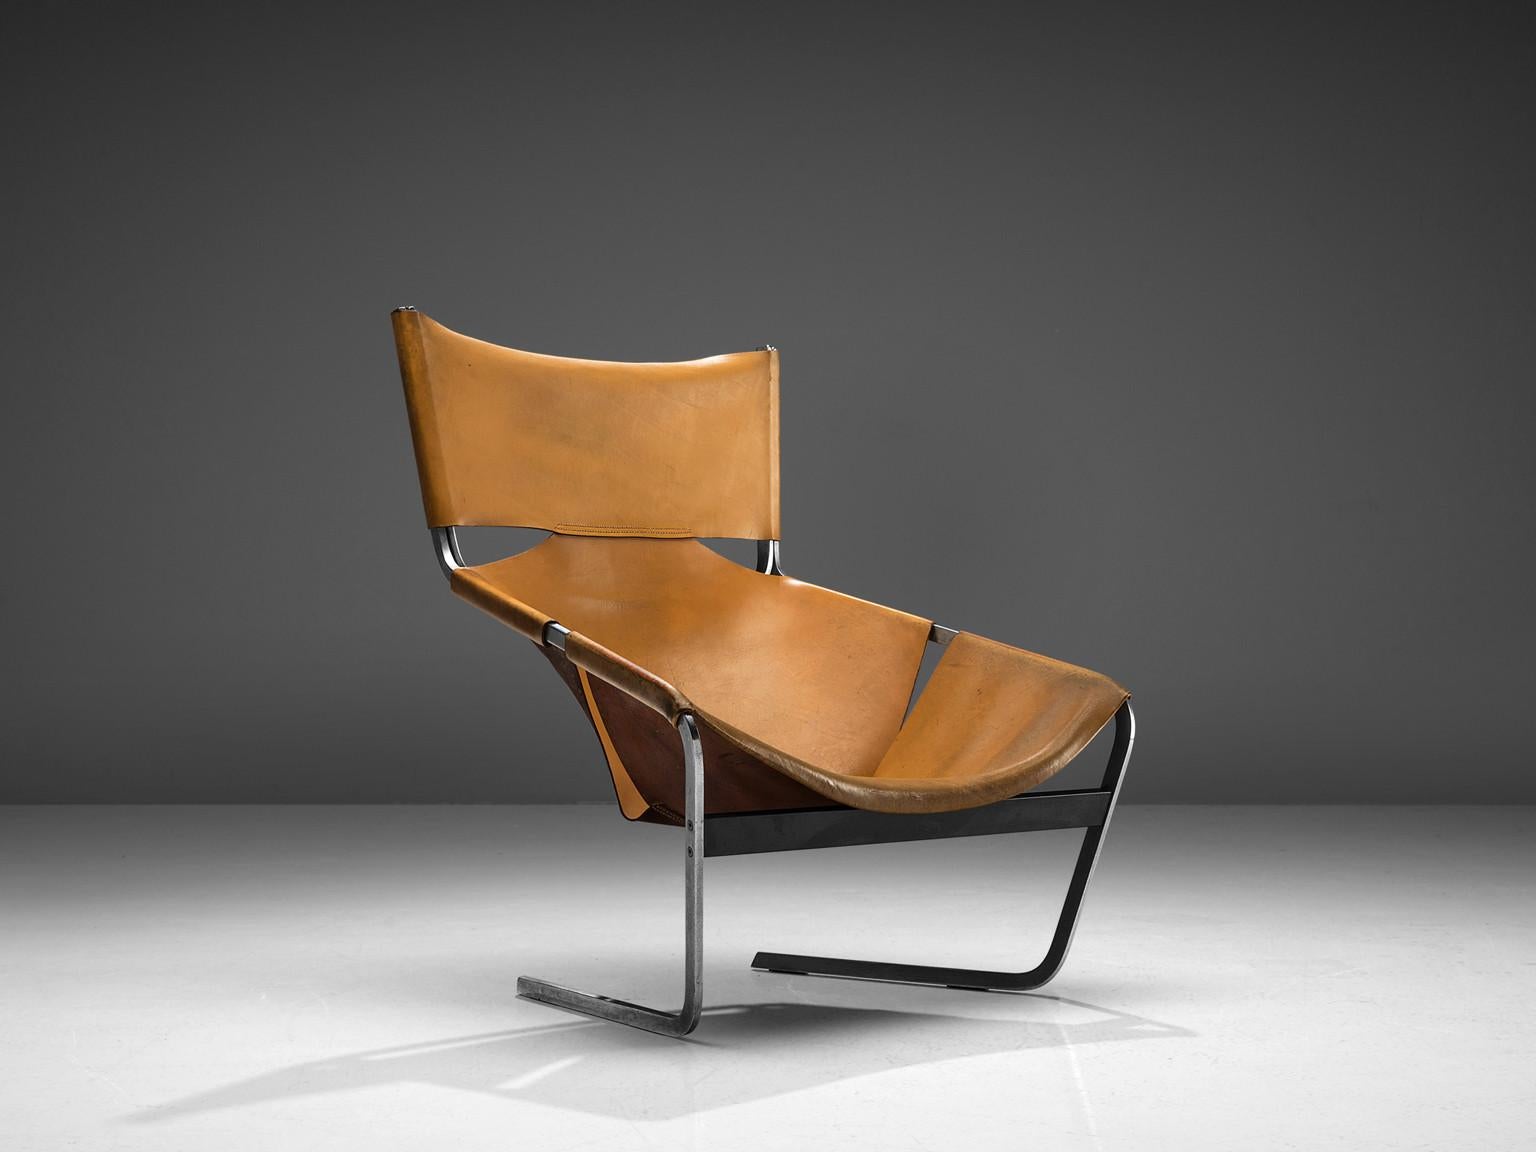 Pierre Paulin for Artifort, F-444 easy chair, metal and cognac leather, the Netherlands, circa 1962.

This cognac leather F-444 chair is designed by Pierre Paulin for Artifort in 1962. This chair shows sharp lines and an angled open seat that